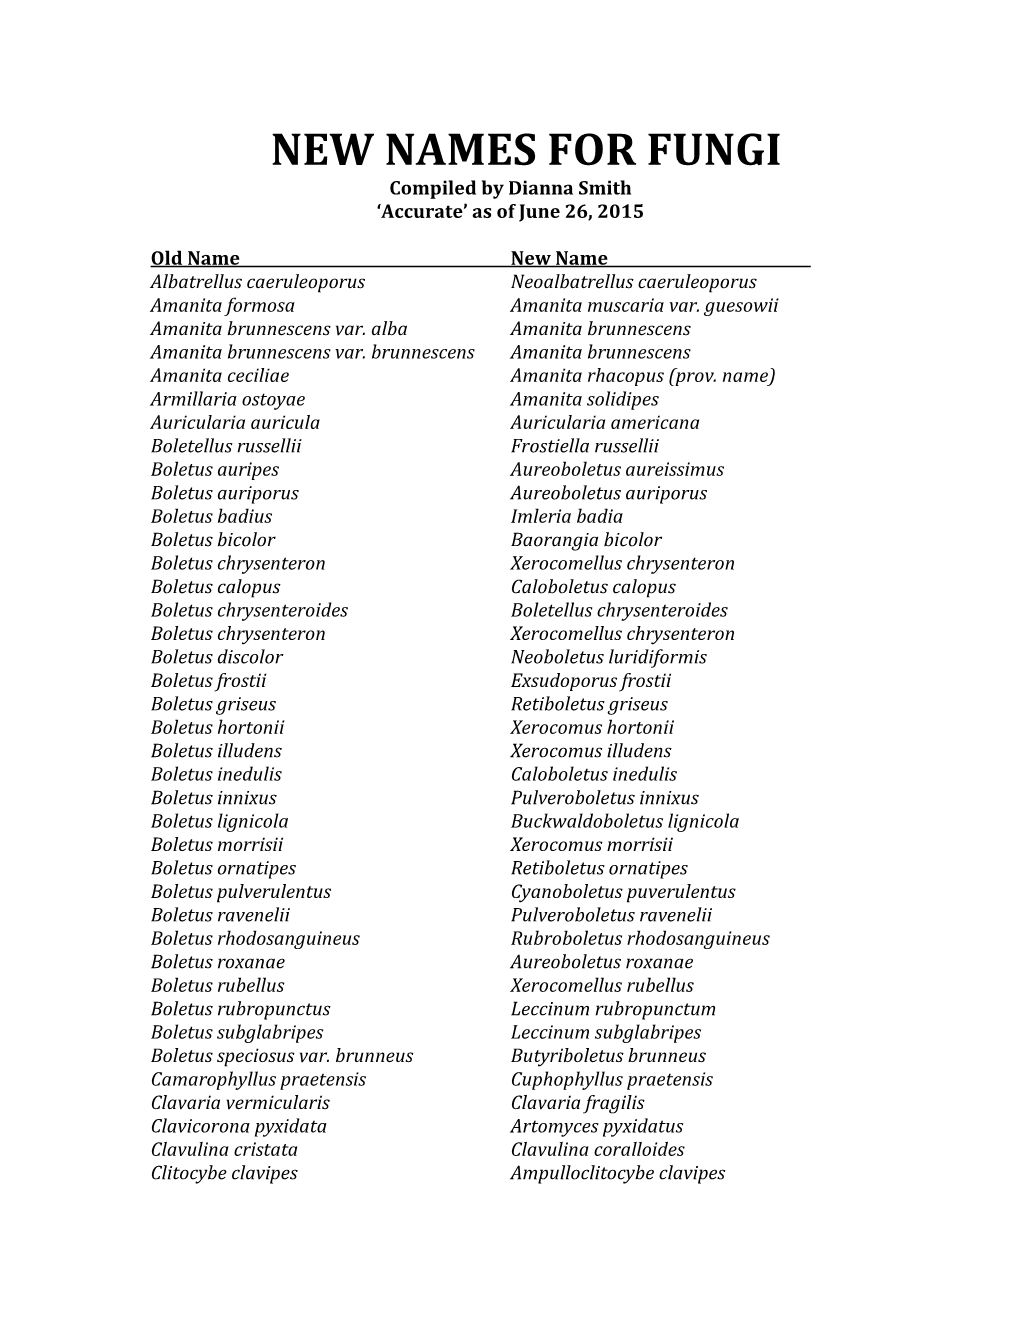 NEW NAMES for FUNGI Compiled by Dianna Smith ‘Accurate’ As of June 26, 2015